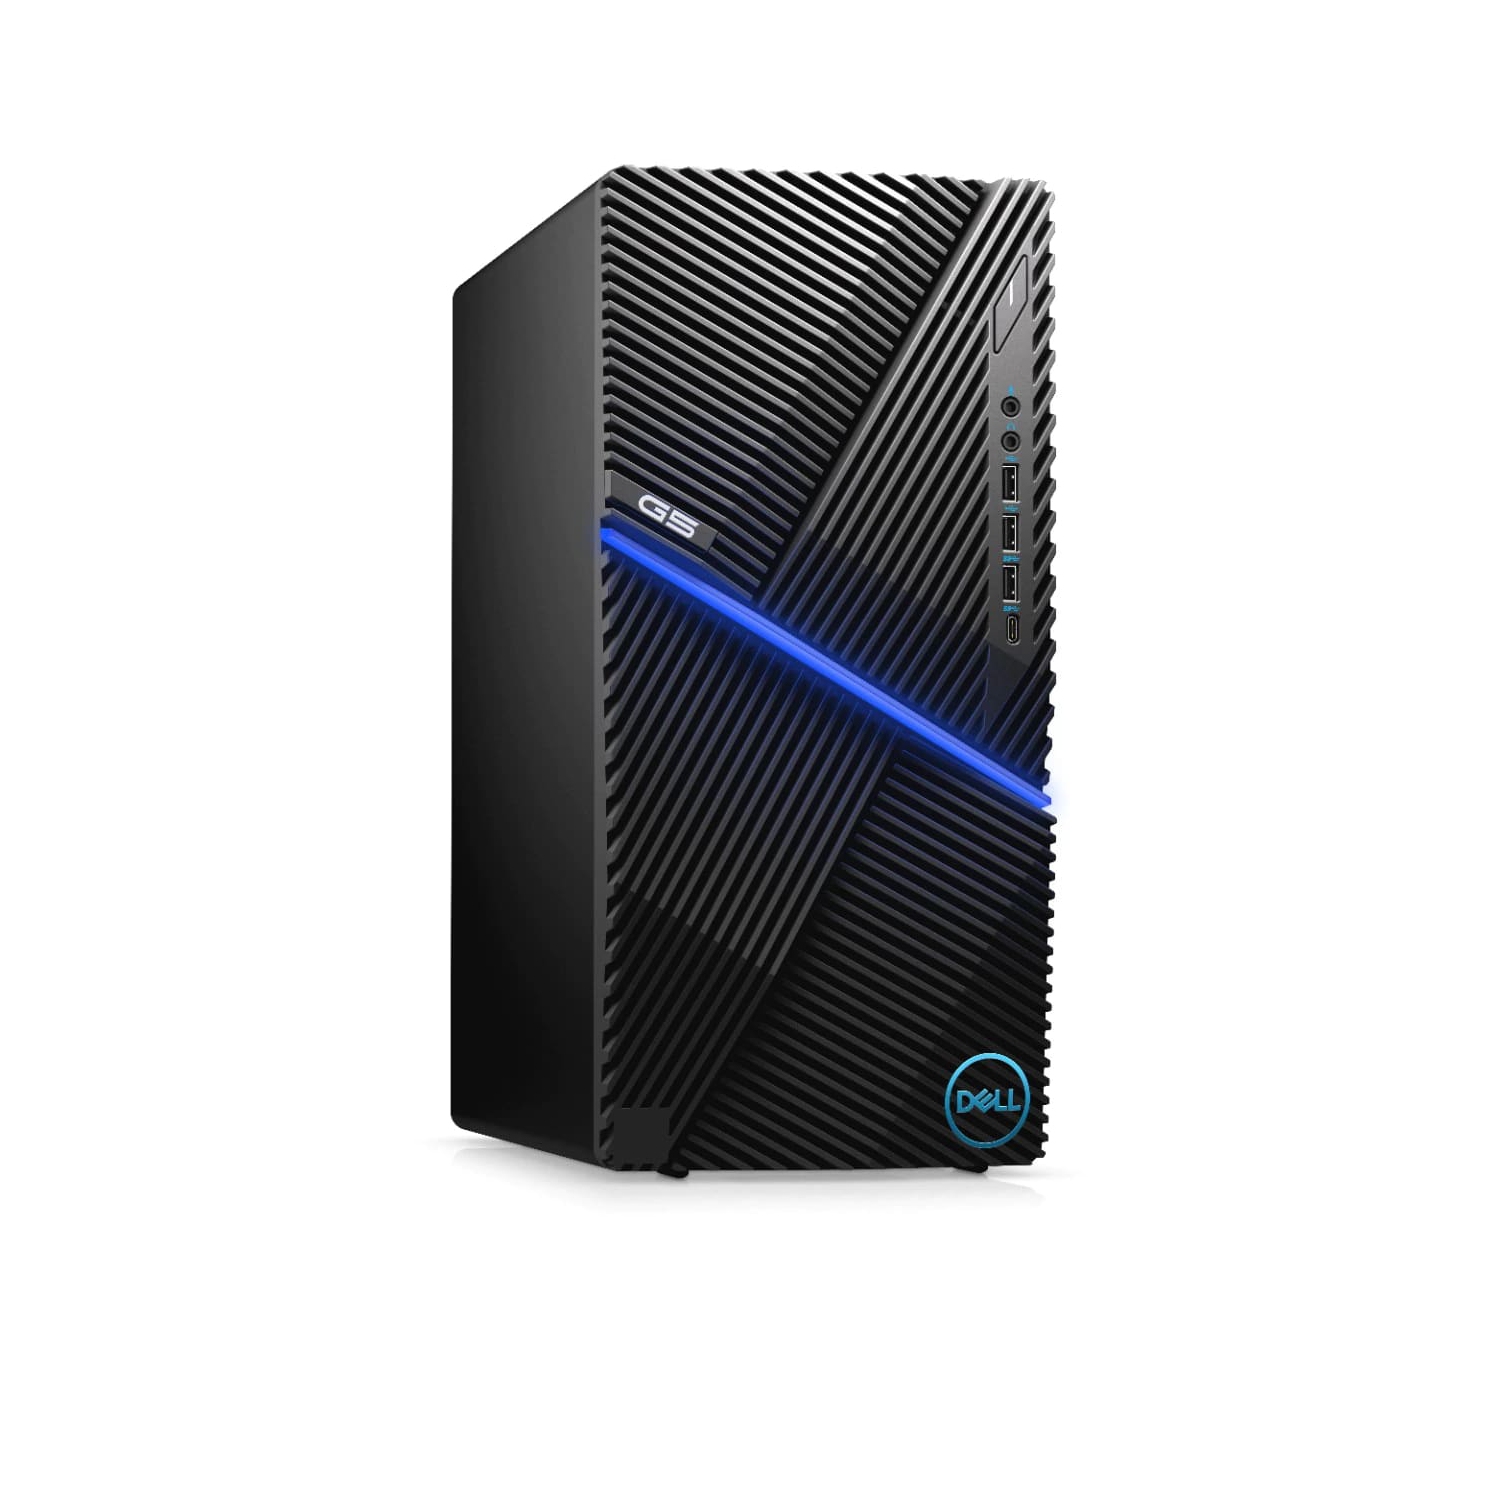 Refurbished (Excellent) - Dell G5 5000 Gaming Desktop (2020), Core i7, 1TB HDD + 256GB SSD, 32GB RAM, 2060 SUPER, 8 Cores @ 5.1 GHz, 10th Gen CPU Certified Refurbished